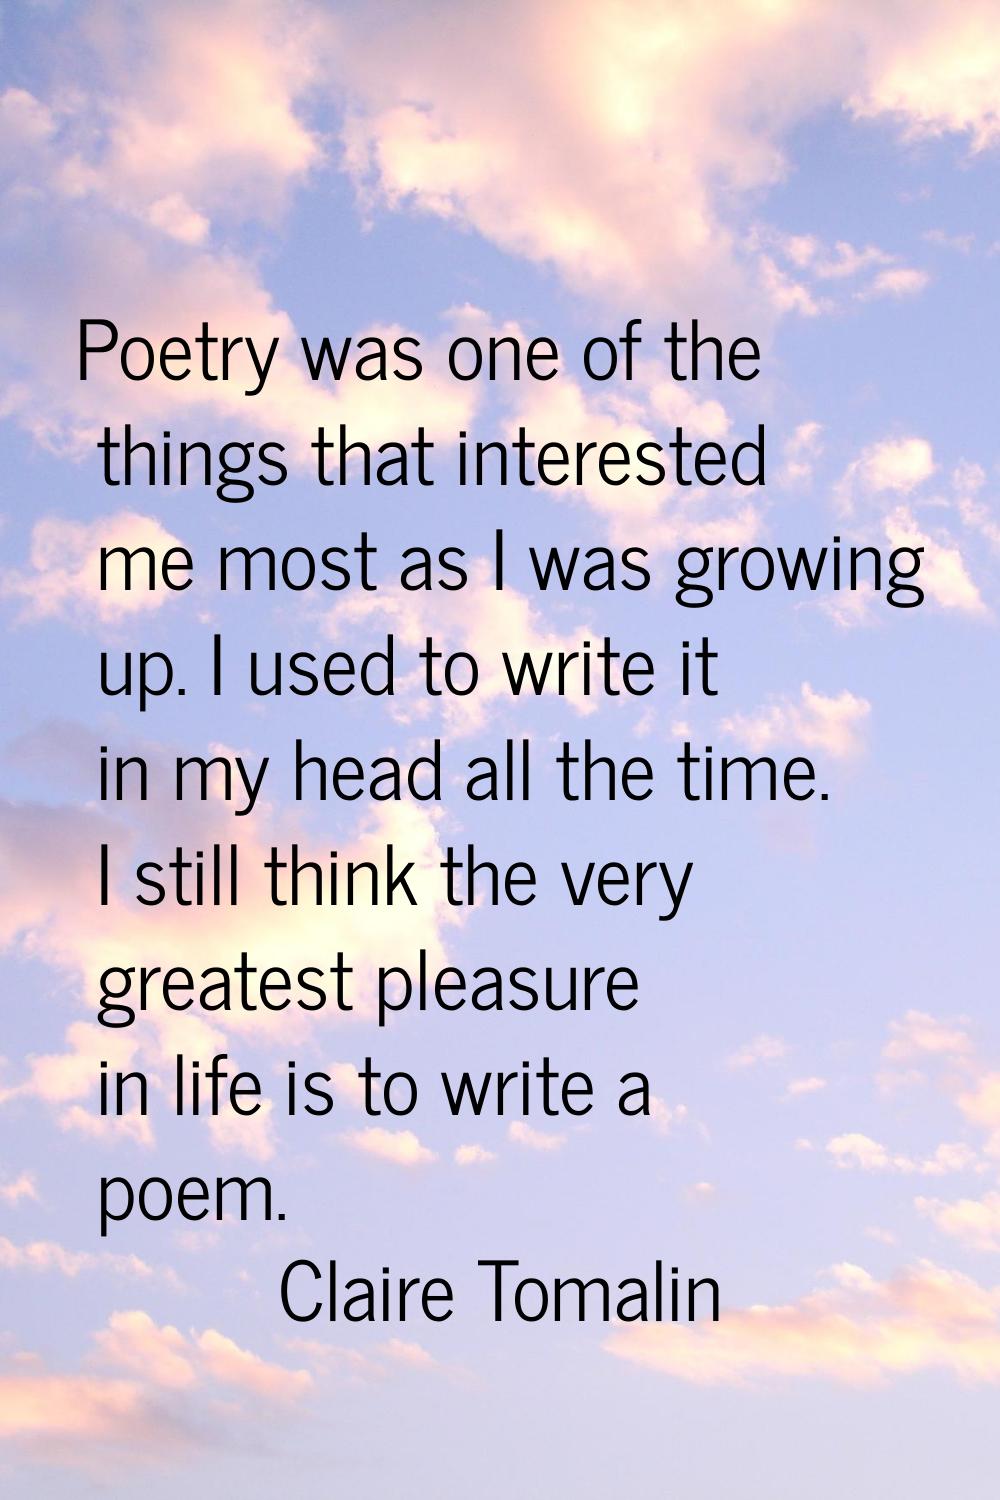 Poetry was one of the things that interested me most as I was growing up. I used to write it in my 